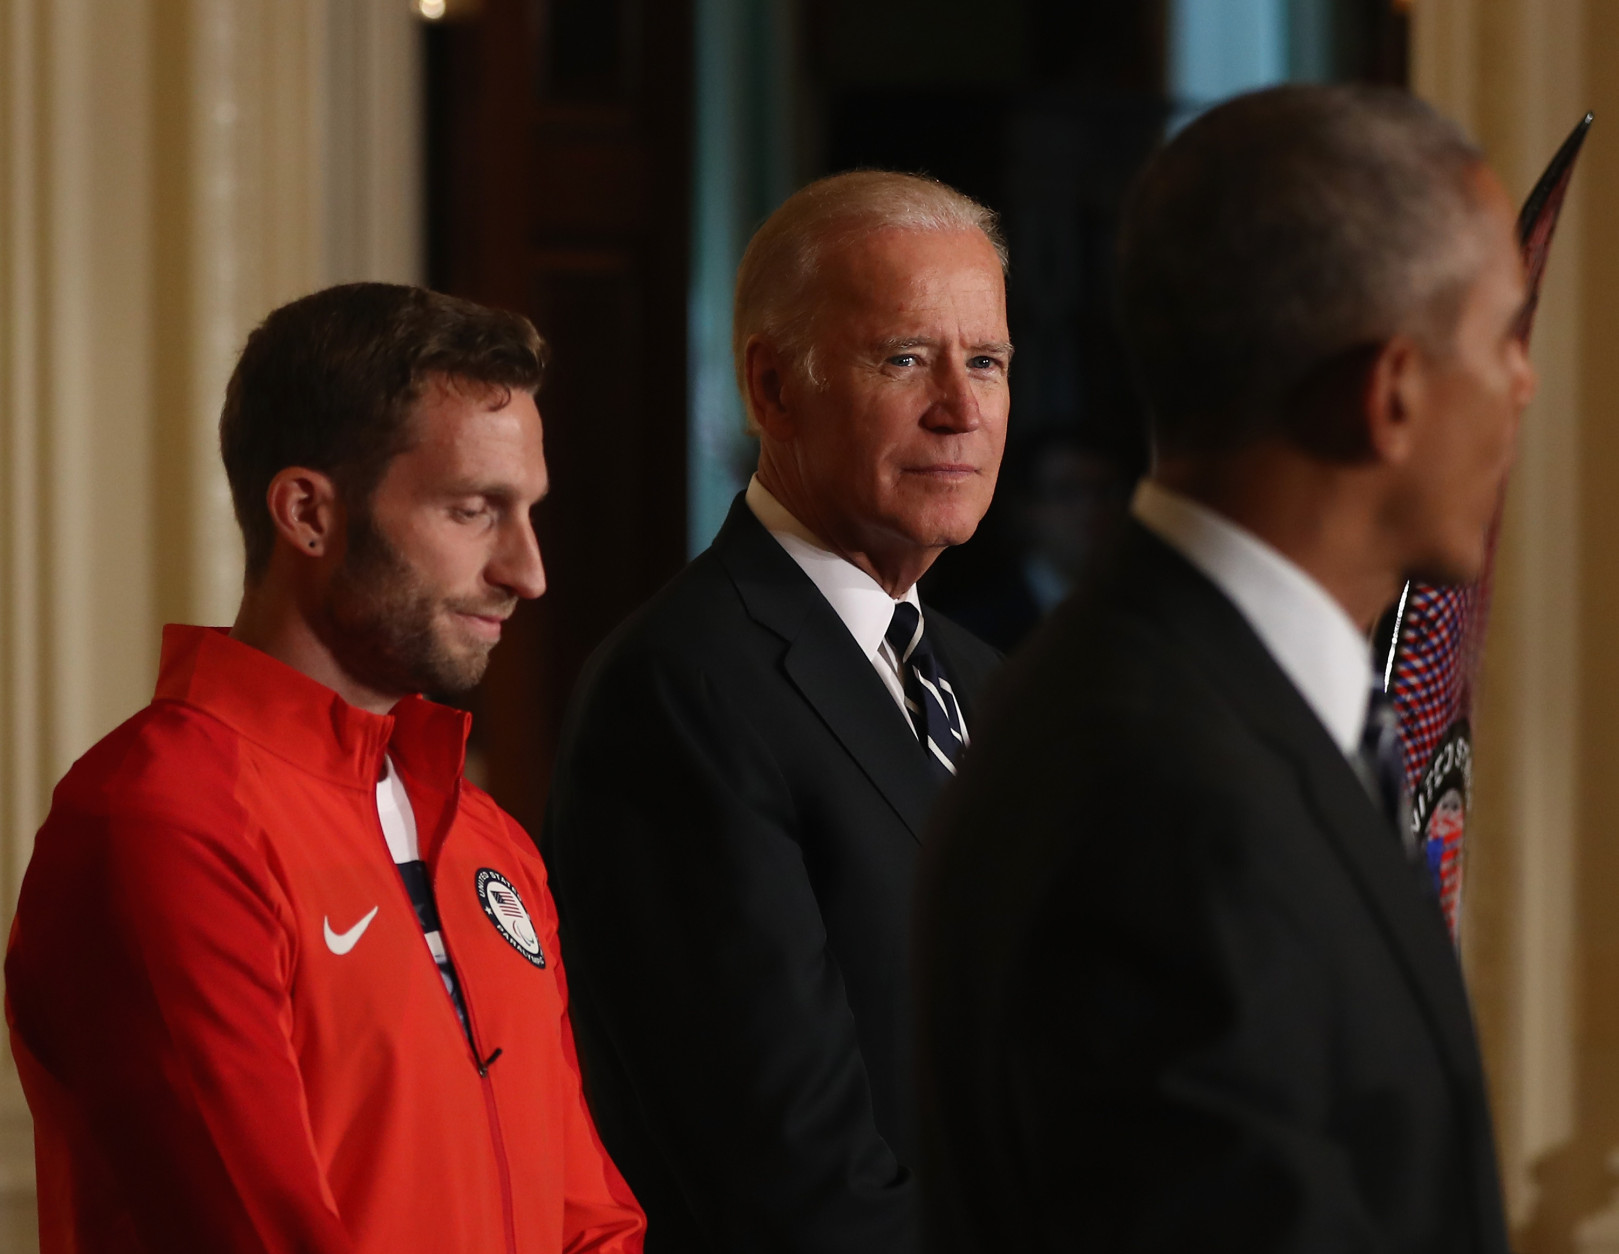 WASHINGTON, DC - SEPTEMBER 29:  U.S. President Barack Obama speaks as Josh Brunais and Vice President Joe Biden stand by during an East Room event at the White House September 29, 2016 in Washington, DC. President Obama and first lady Michelle Obama welcome the 2016 U.S. Olympic and Paralympic teams to the White House to honor their participation and success in the Rio Olympic Games this year.  (Photo by Elsa/Getty Images)